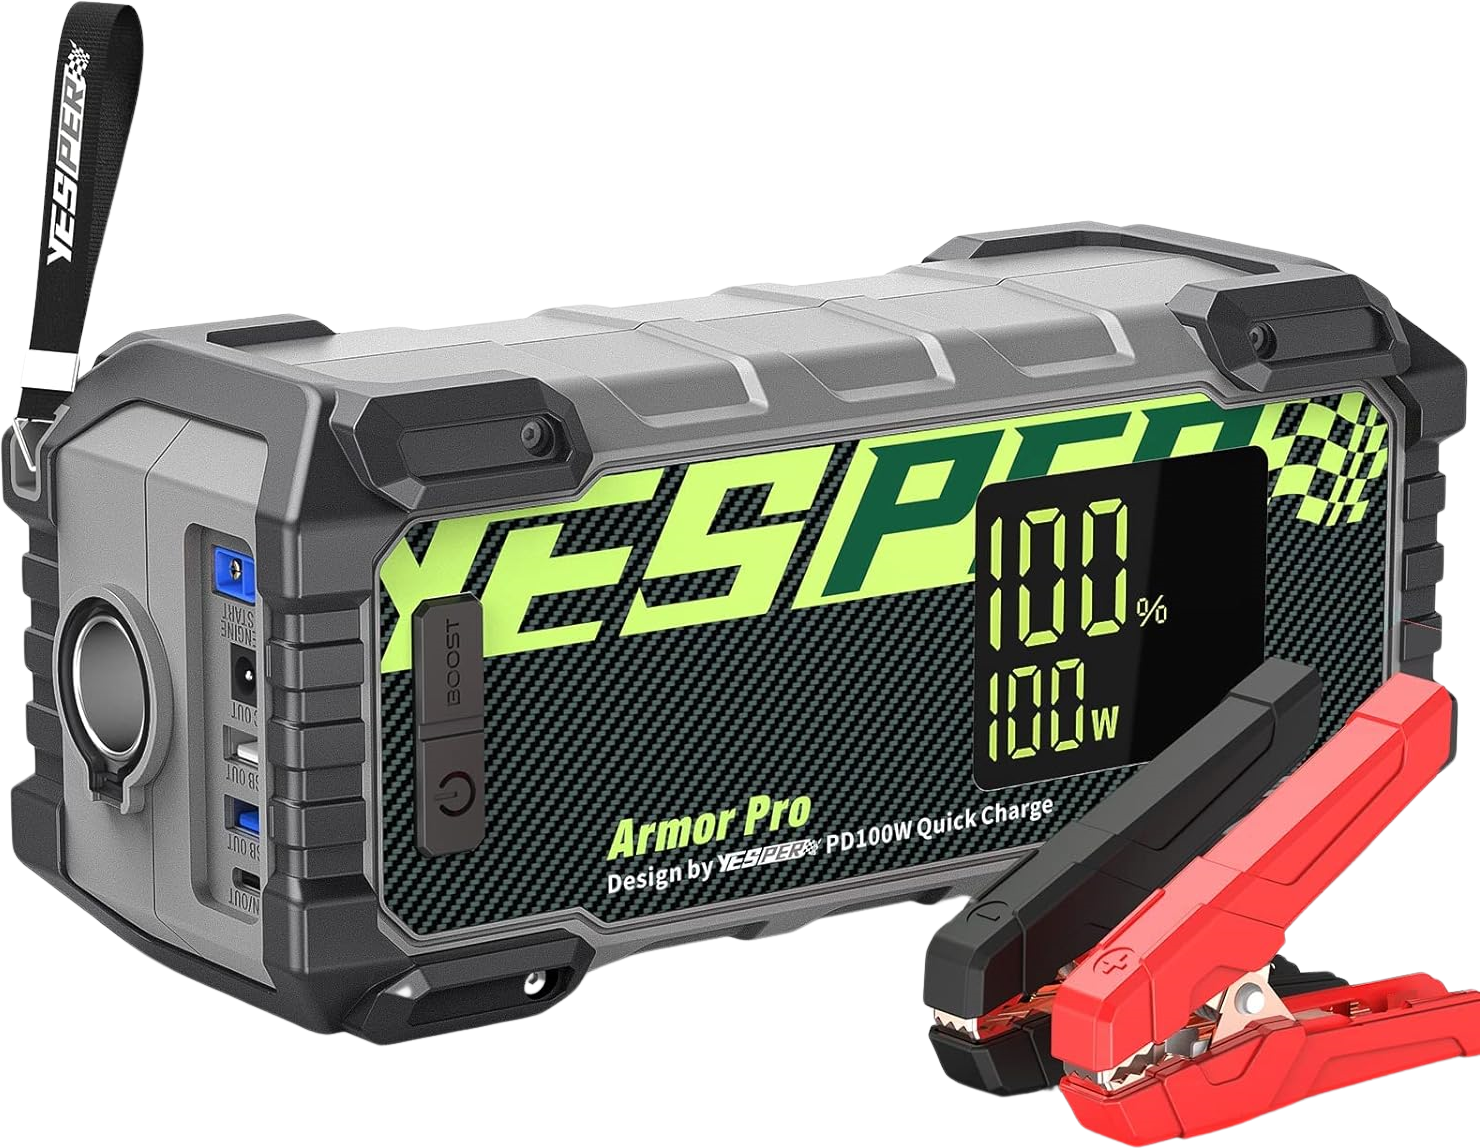 Yesper, Yesper ARMOR-PRO Jump Starter Battery Pack Power Bank 2500A 66666mAh 120 Starts for 12V Vehicles Up To 8.0L Gas and 5.5L Diesel Engines New